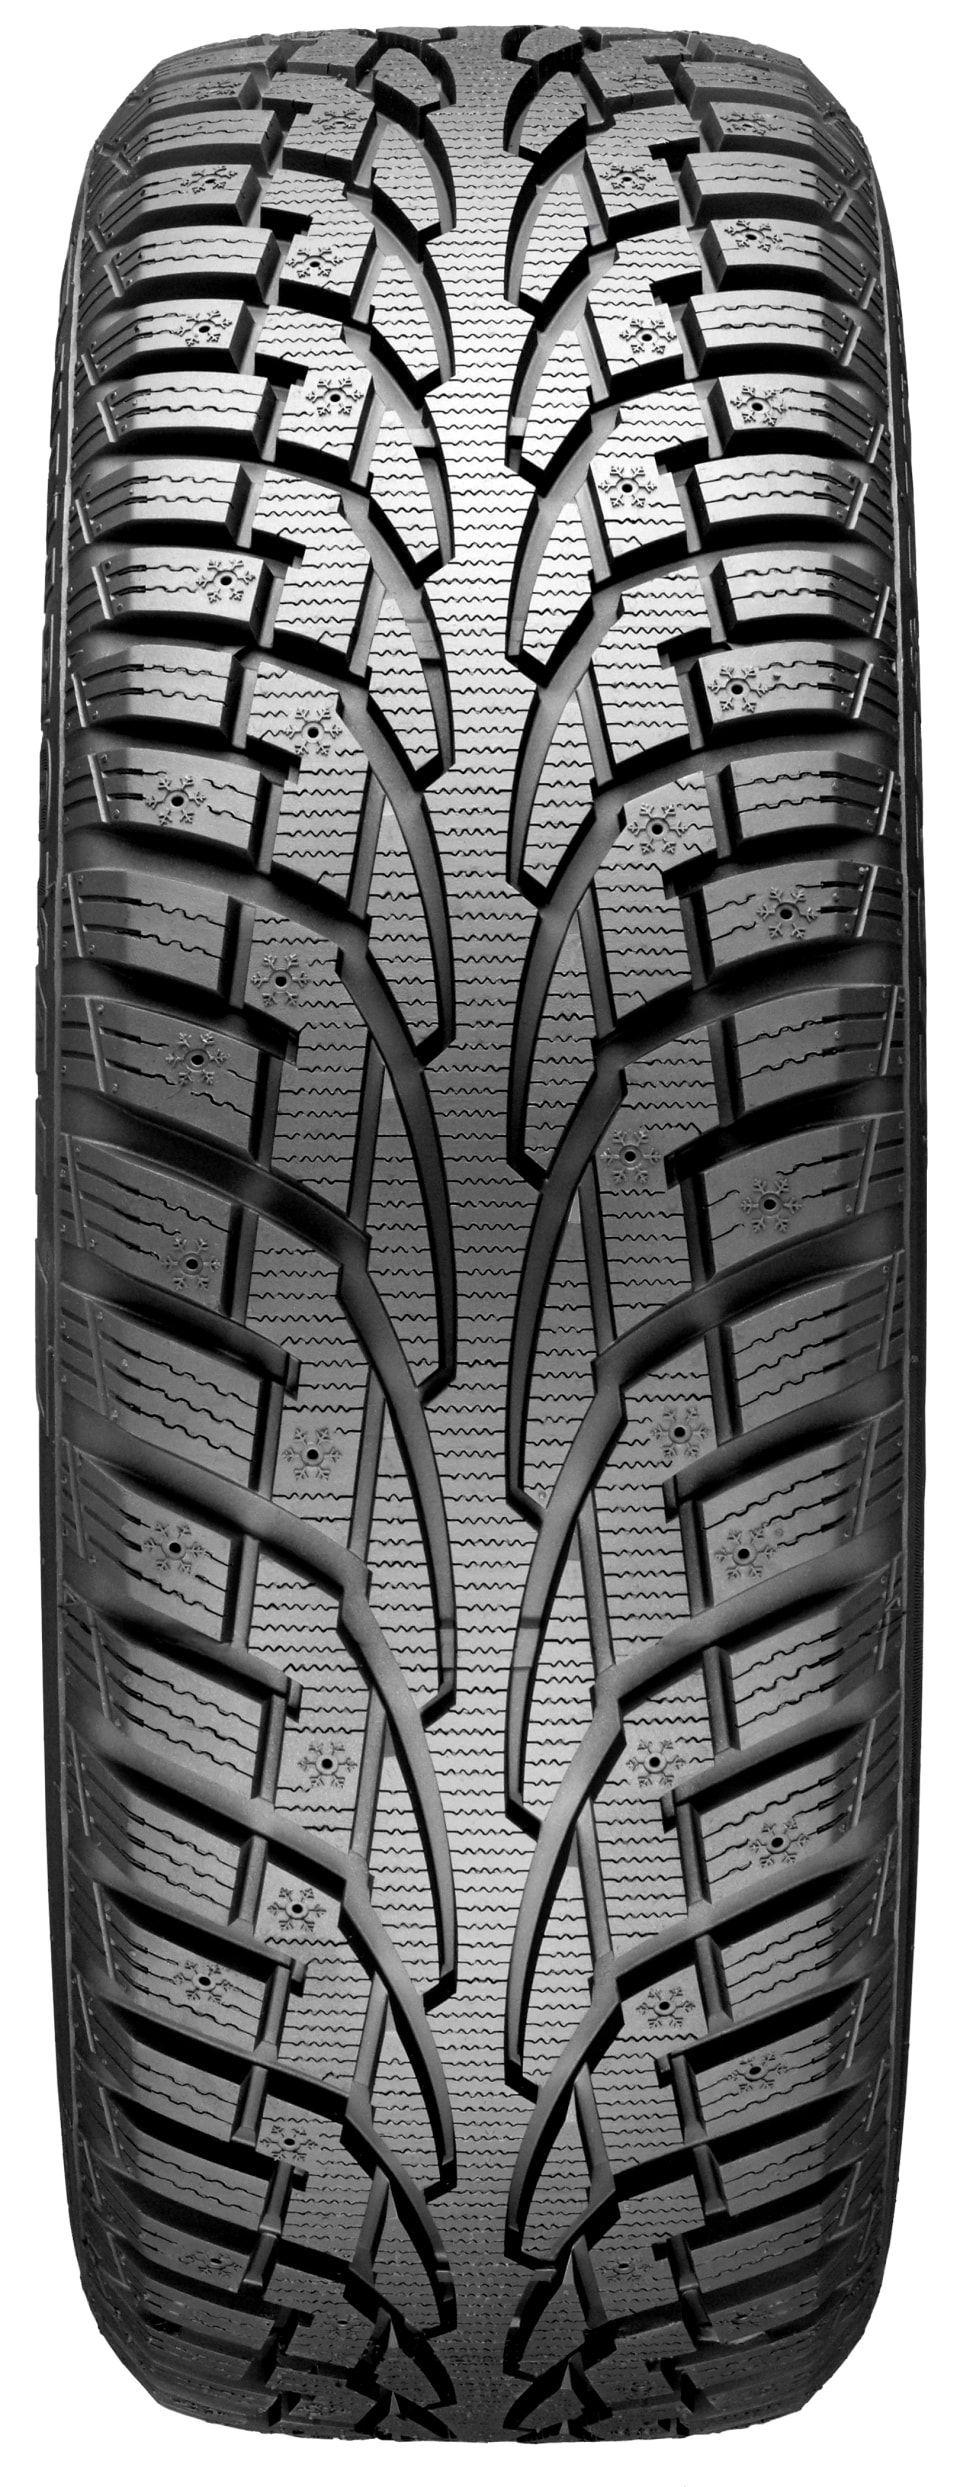 Active Green + Ross - Uniroyal - Tiger Paw Ice & Snow 3 - P155/80R13 79T